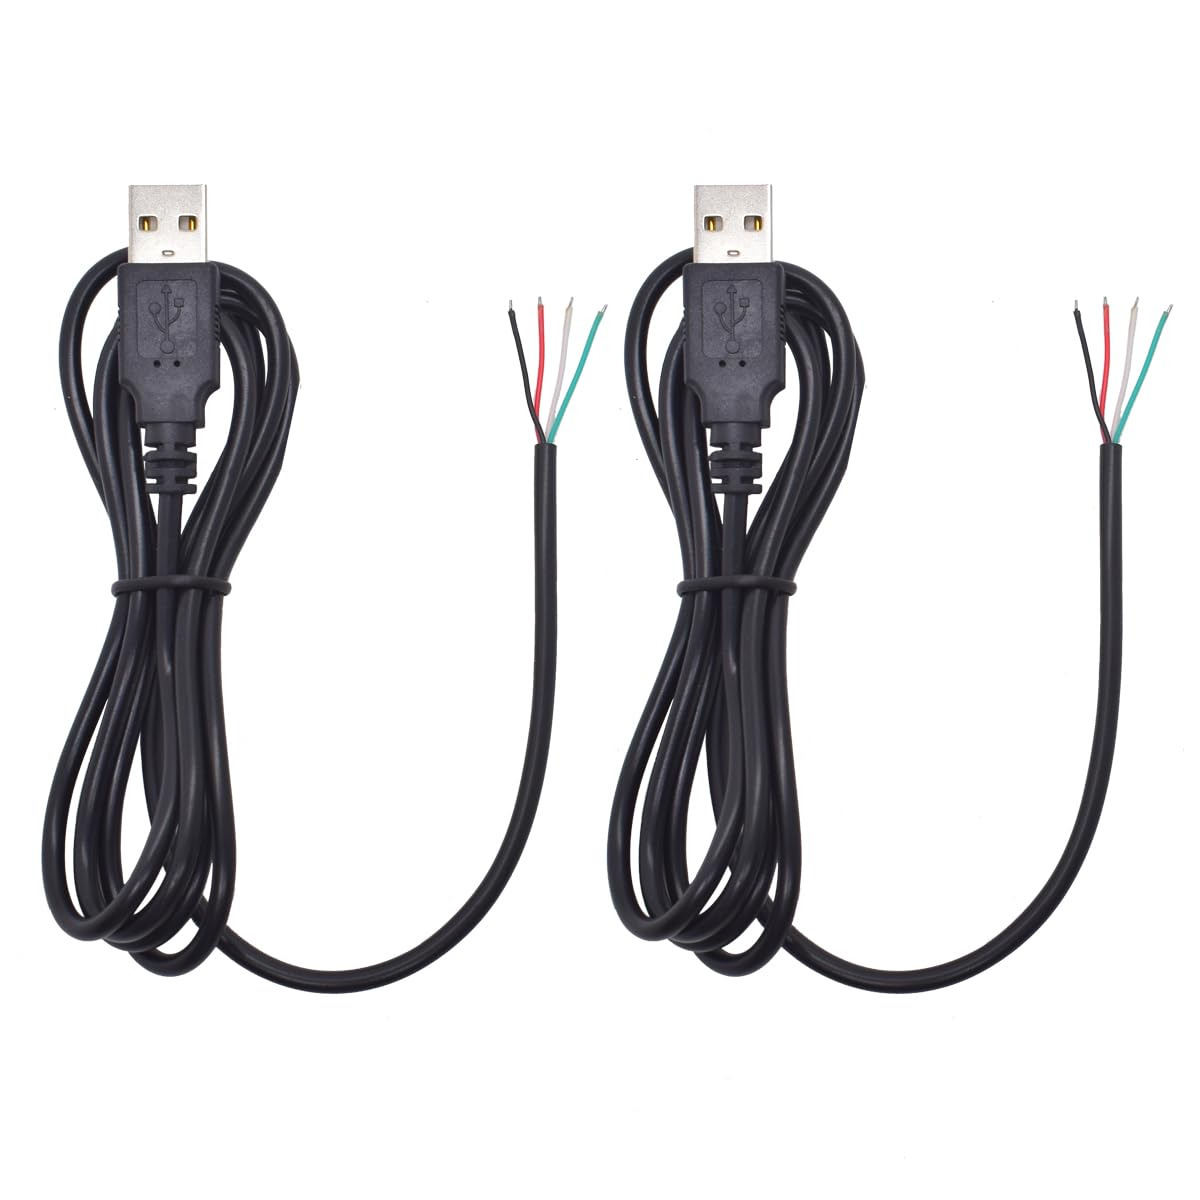 2PCS USB 2.0 Pigtail 4 Wire 1.2M/4FT USB a Male 4 Pin Bare Wire 5V/1A Power and 